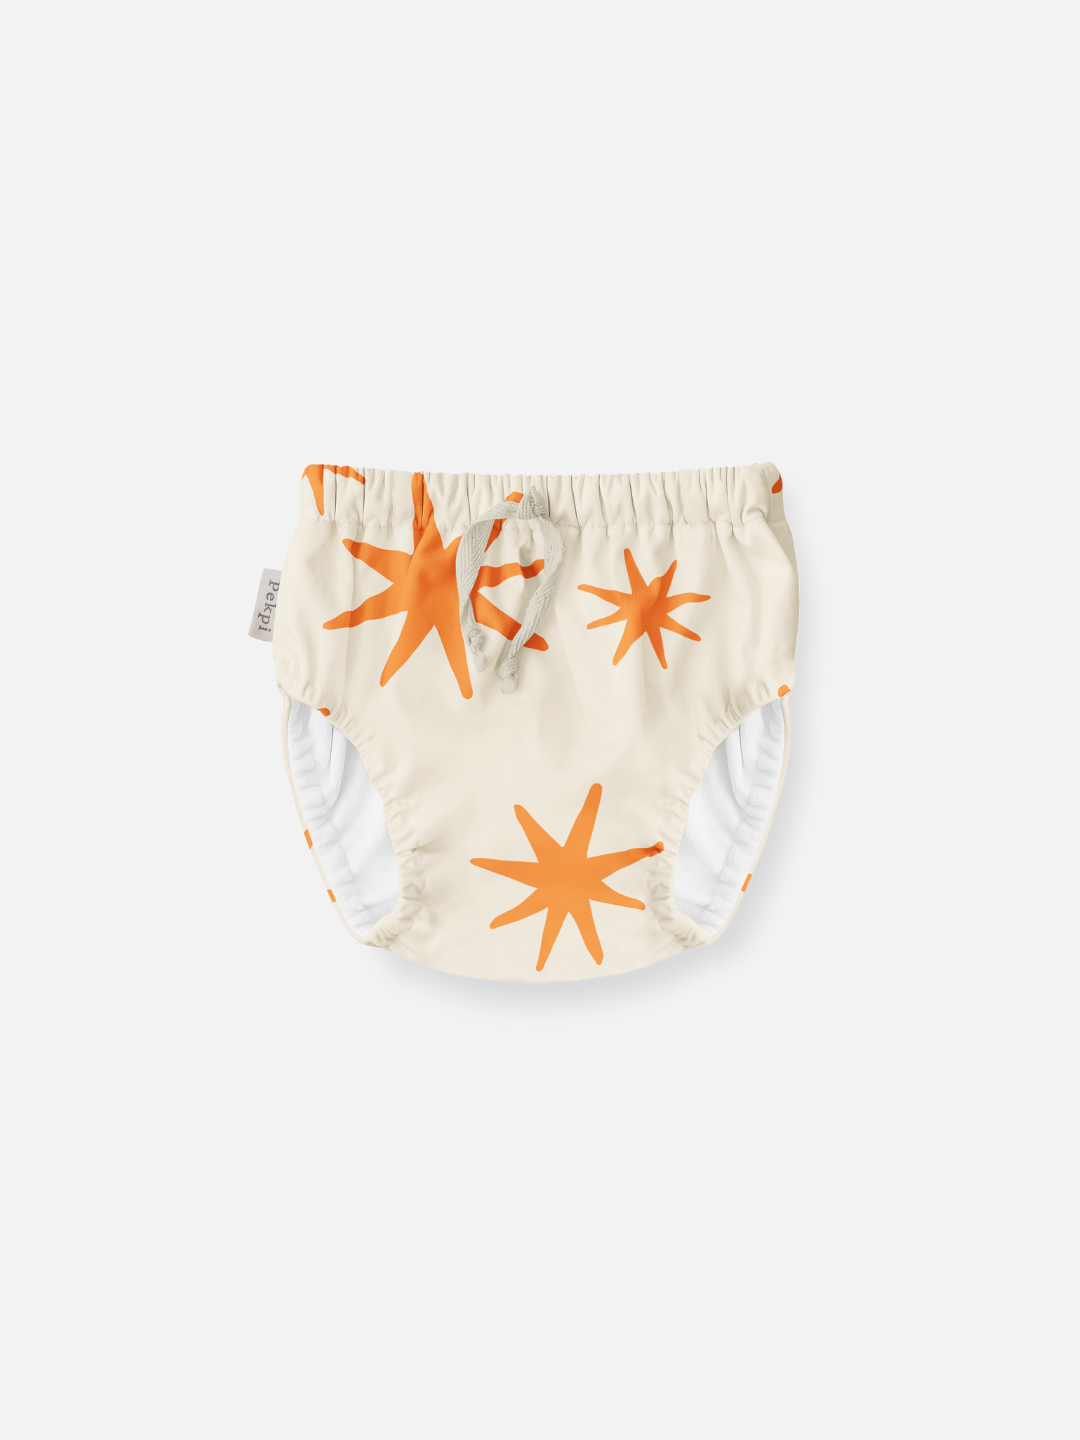 Capri | The front view of the swim diaper with an elastic waist with a tie and elastic leg holes. The diaper is a cream color with orange stars shapes all over.